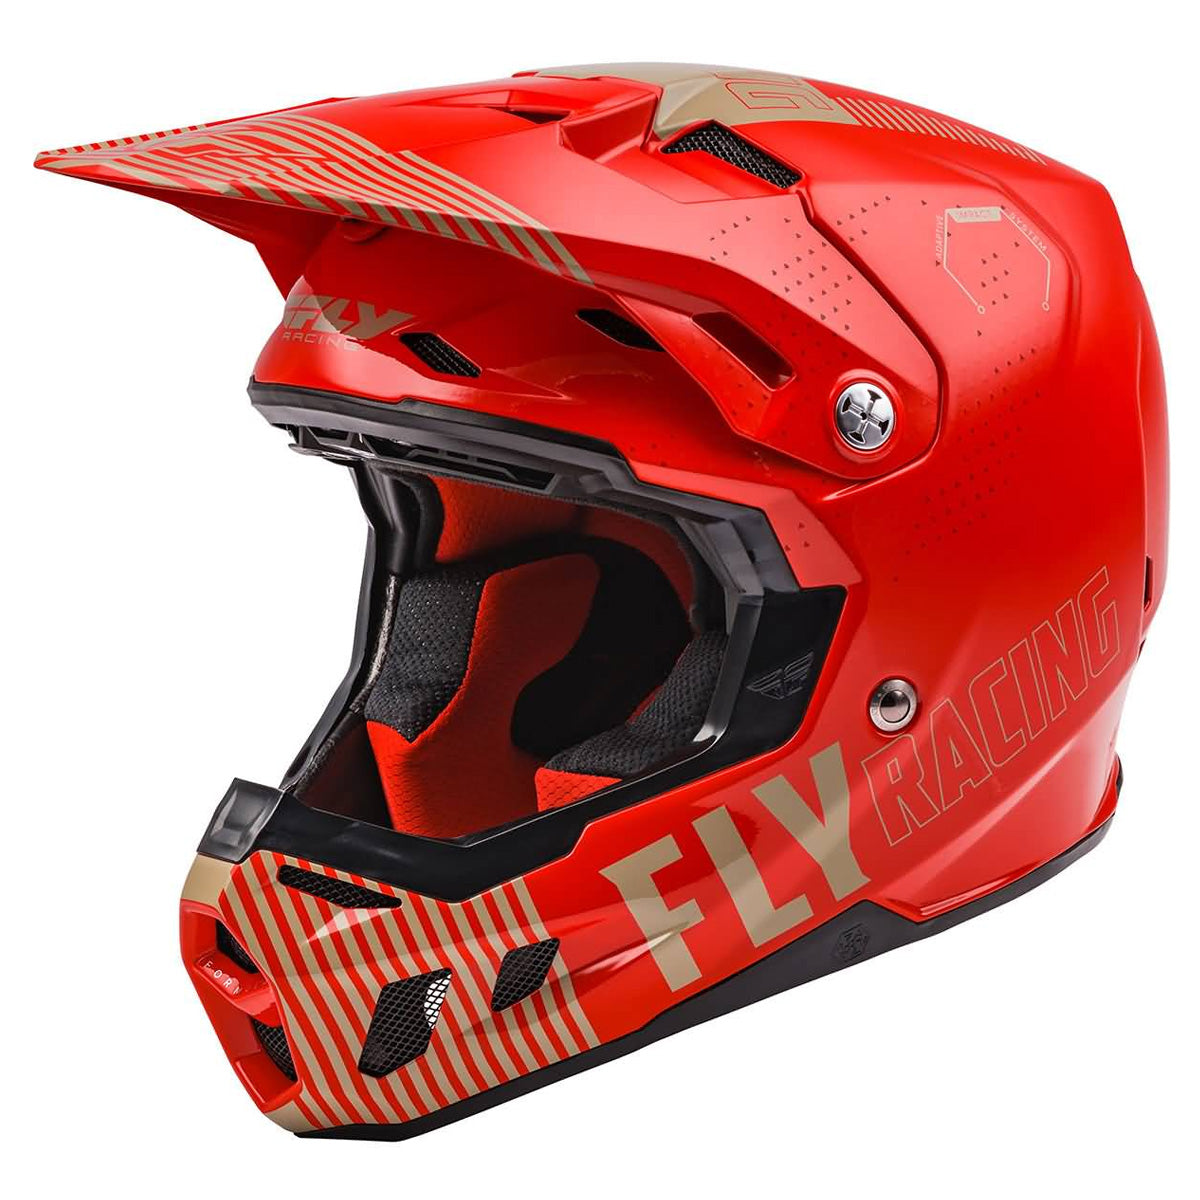 Fly Racing Formula CC Primary Adult Off-Road Helmets